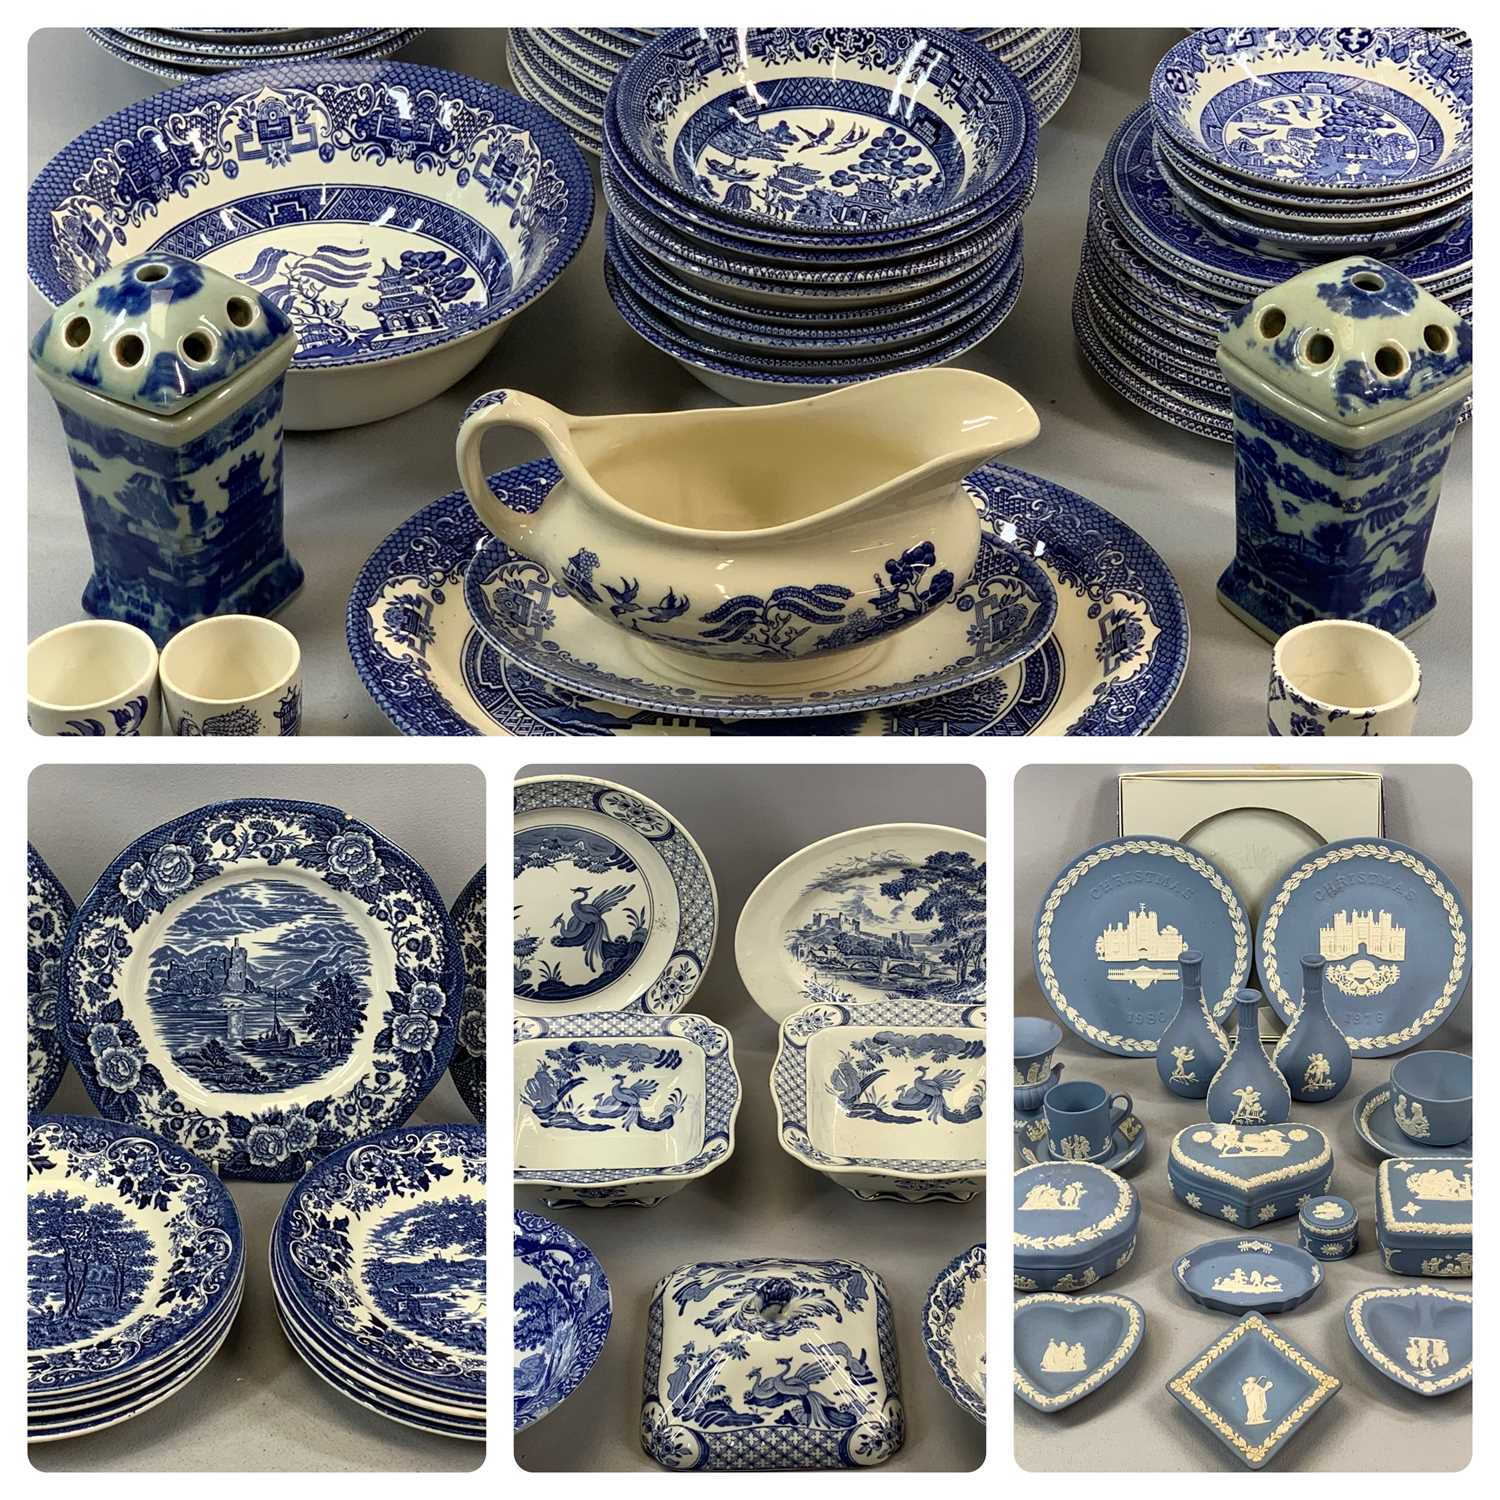 GROUP OF STAFFORDSHIRE POTTERY including Wedgwood blue Jasperware of jugs, plates, posy vases,